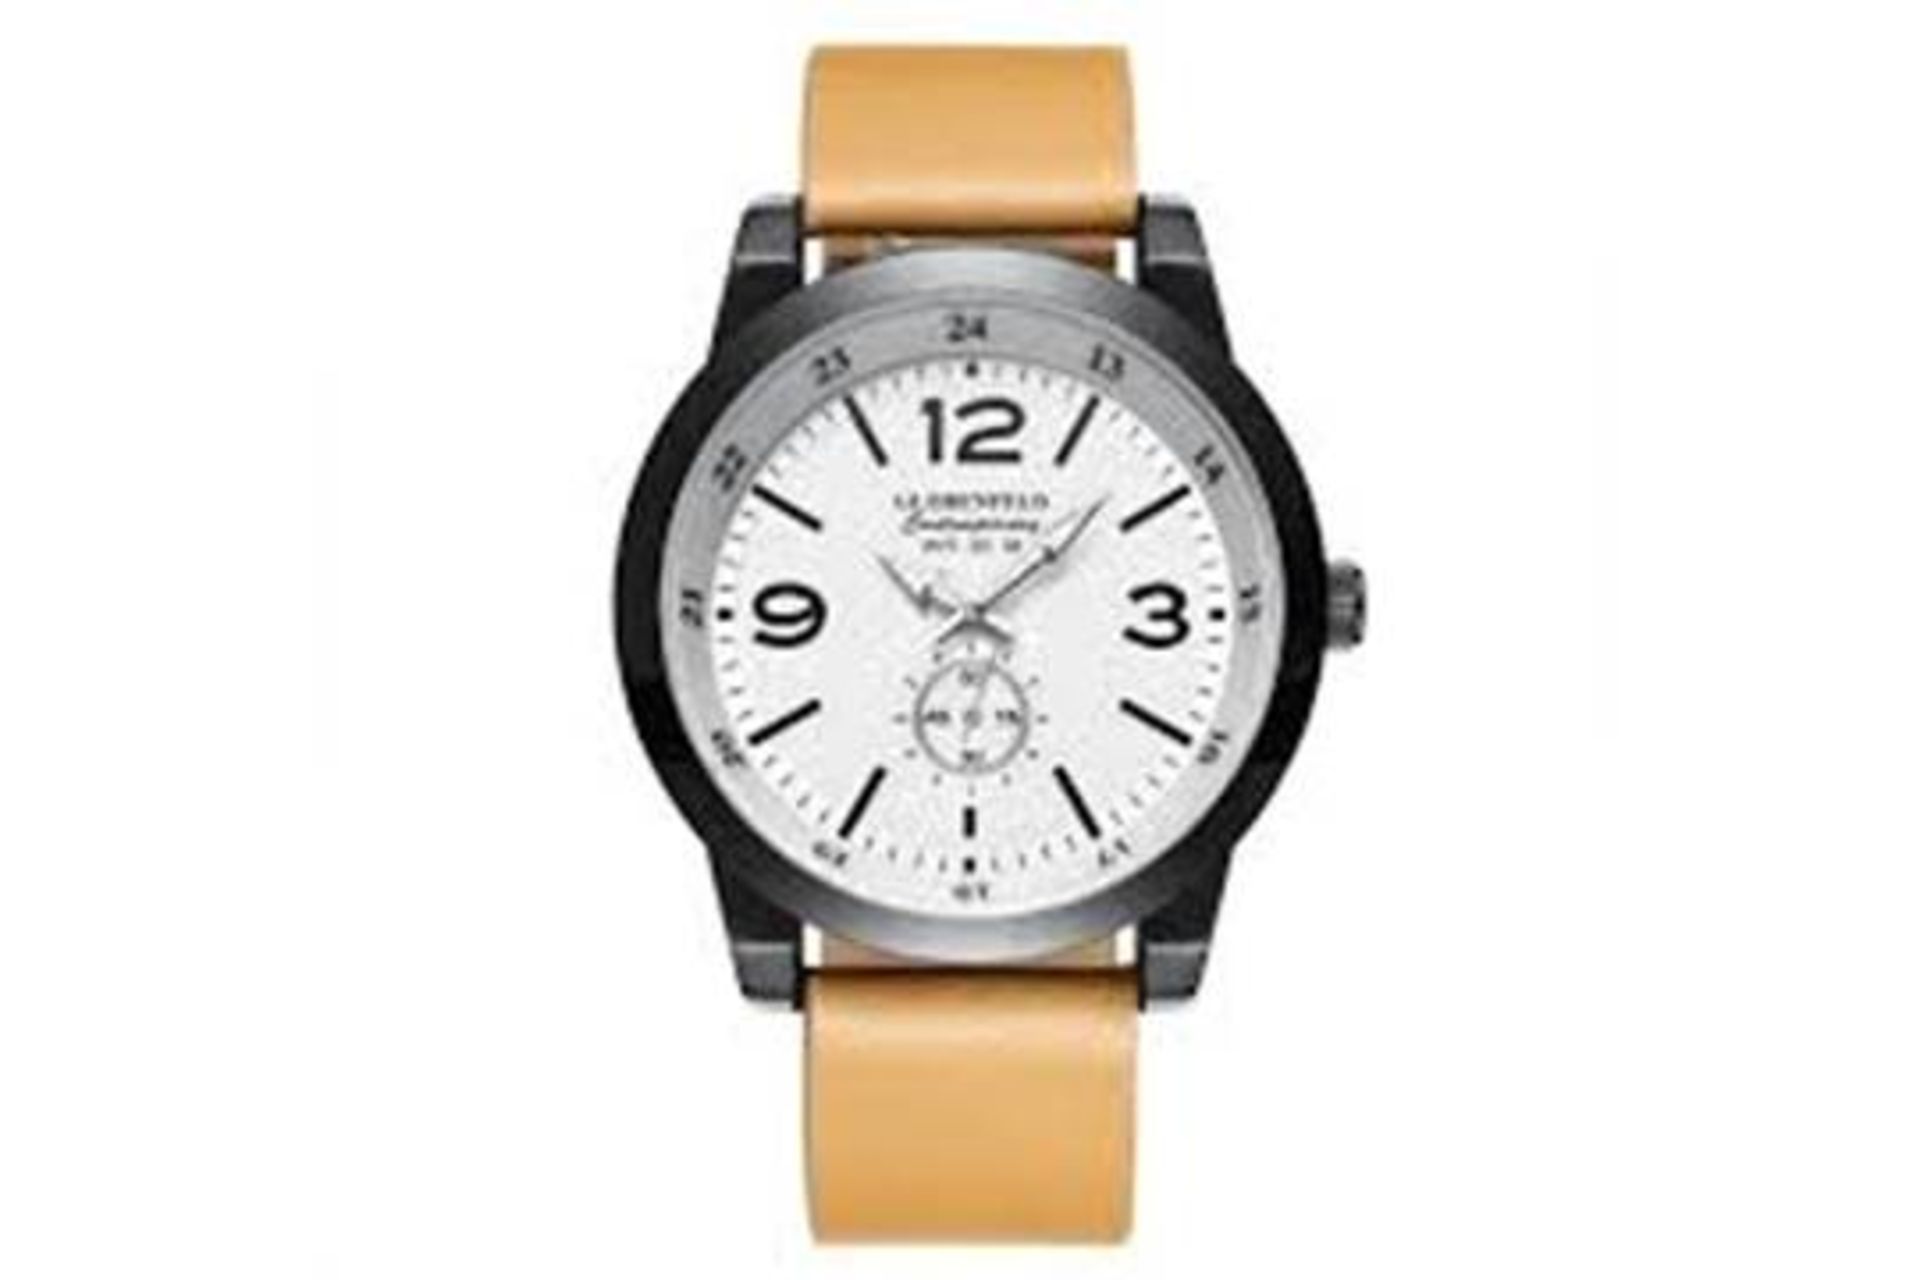 BOXED BRAND NEW GLOBENFELD CONTEMPORY TAN LEATHER STRAP WHITE FACE RRP £395 (SBW-WWW)